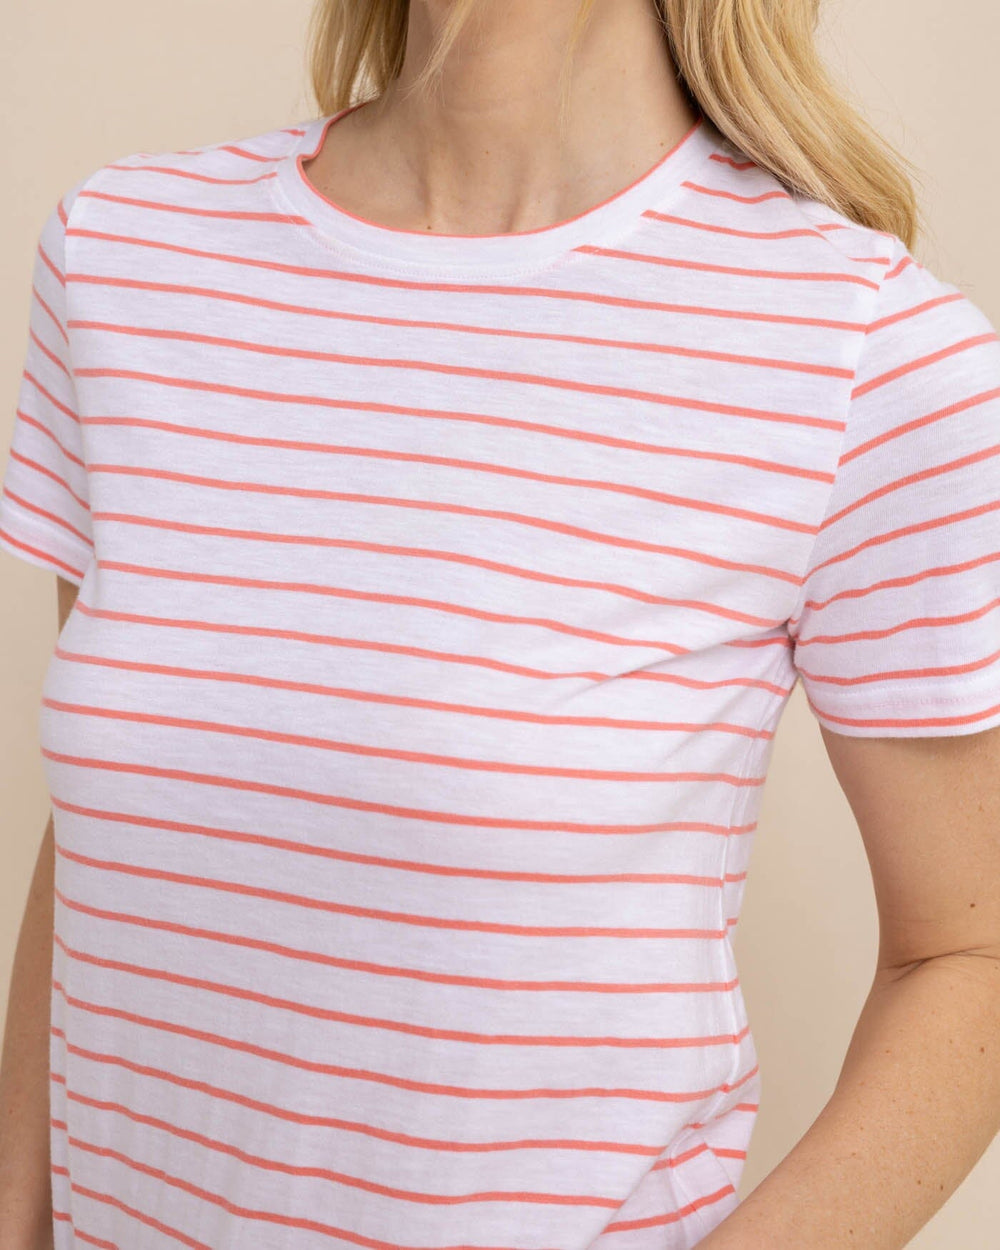 The detail view of the Southern Tide Sun Farer Stripe Crew Neck T-Shirt by Southern Tide - Conch Shell